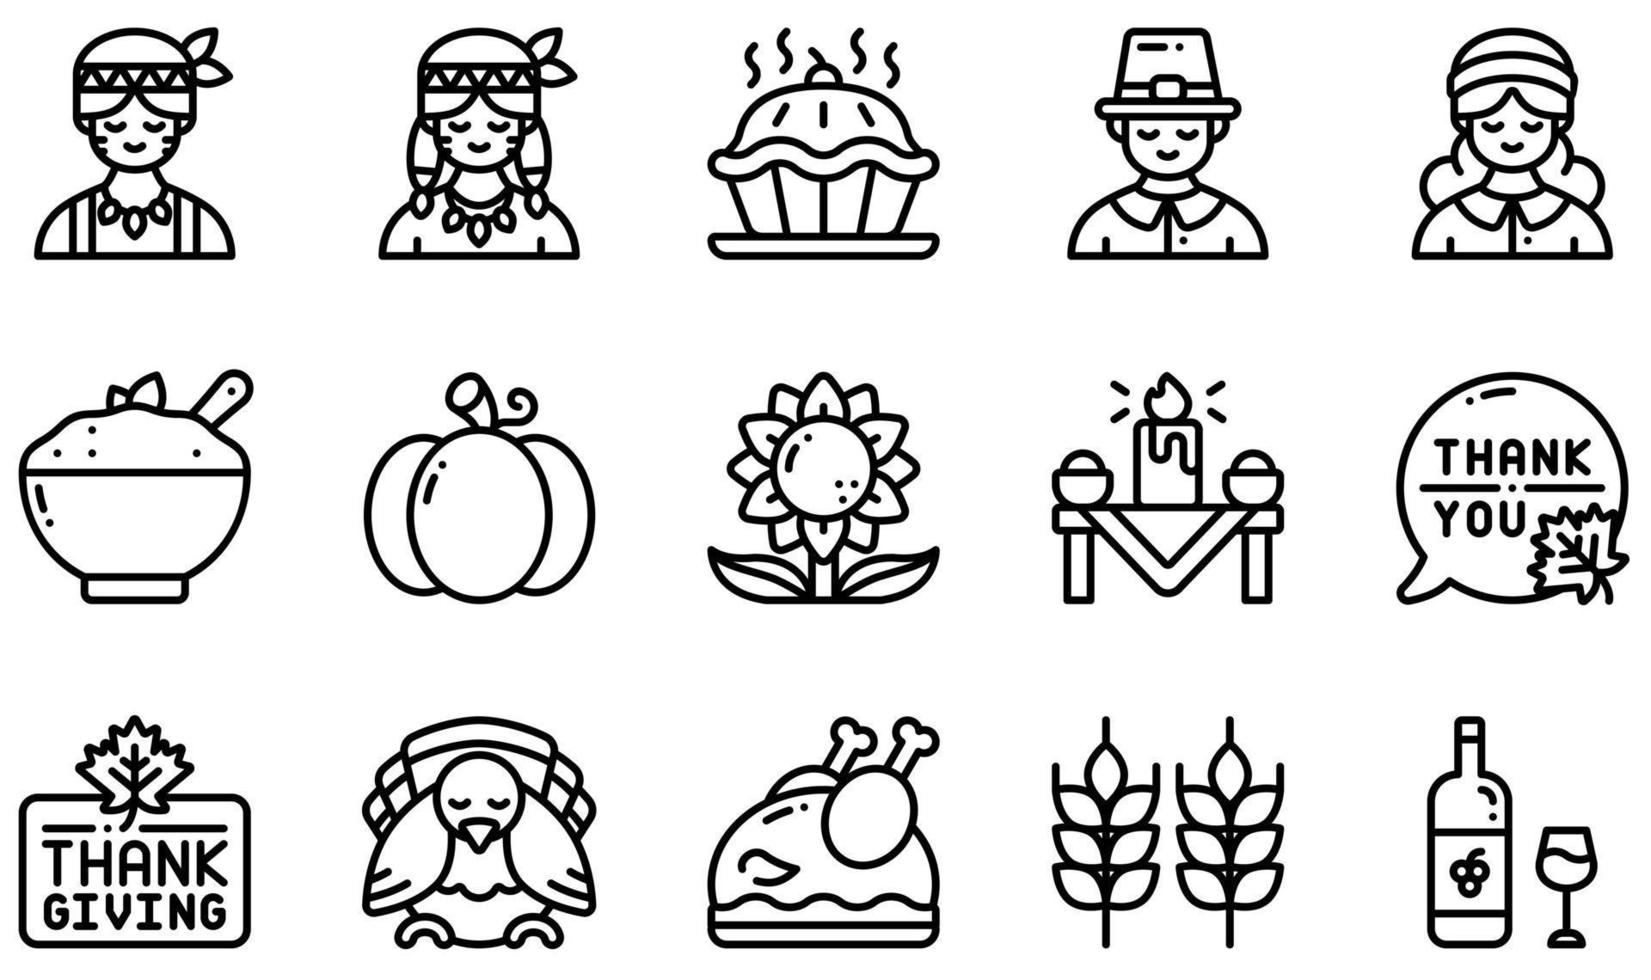 Set of Vector Icons Related to Thanksgiving . Contains such Icons as Pie, Pilgrim, Native American, Pumpkin, Thanksgiving, Turkey and more.